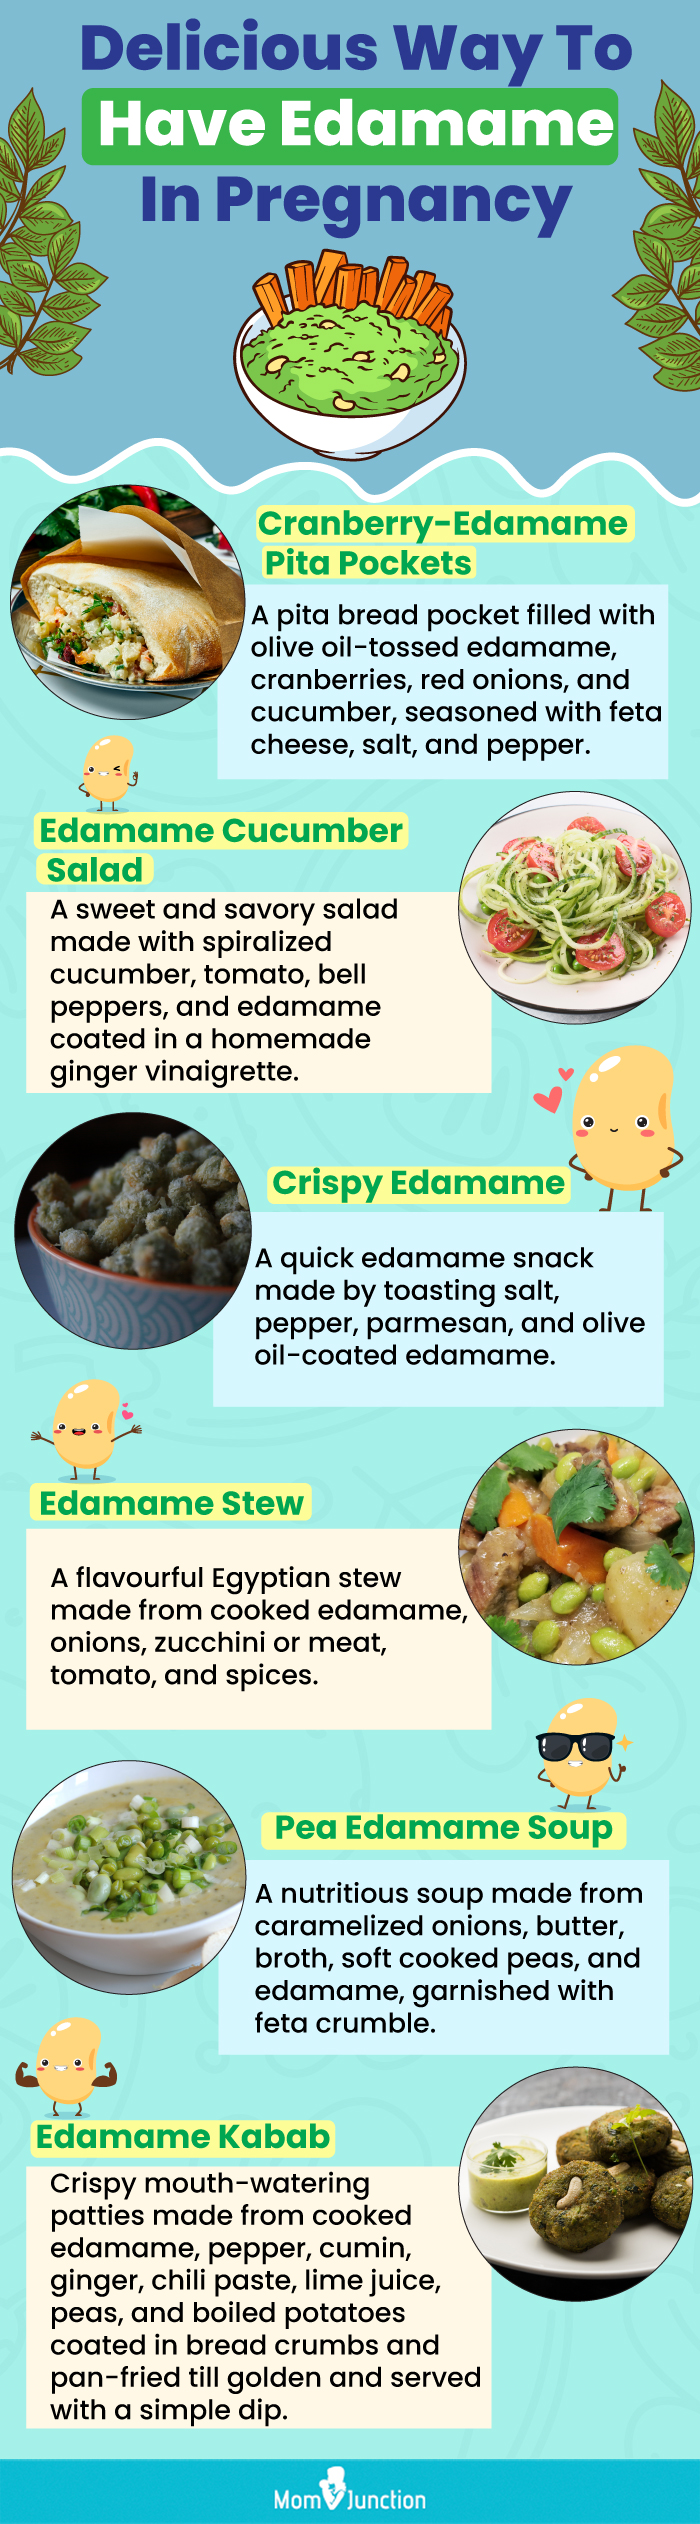 delicious way to have edamame in pregnancy (infographic)